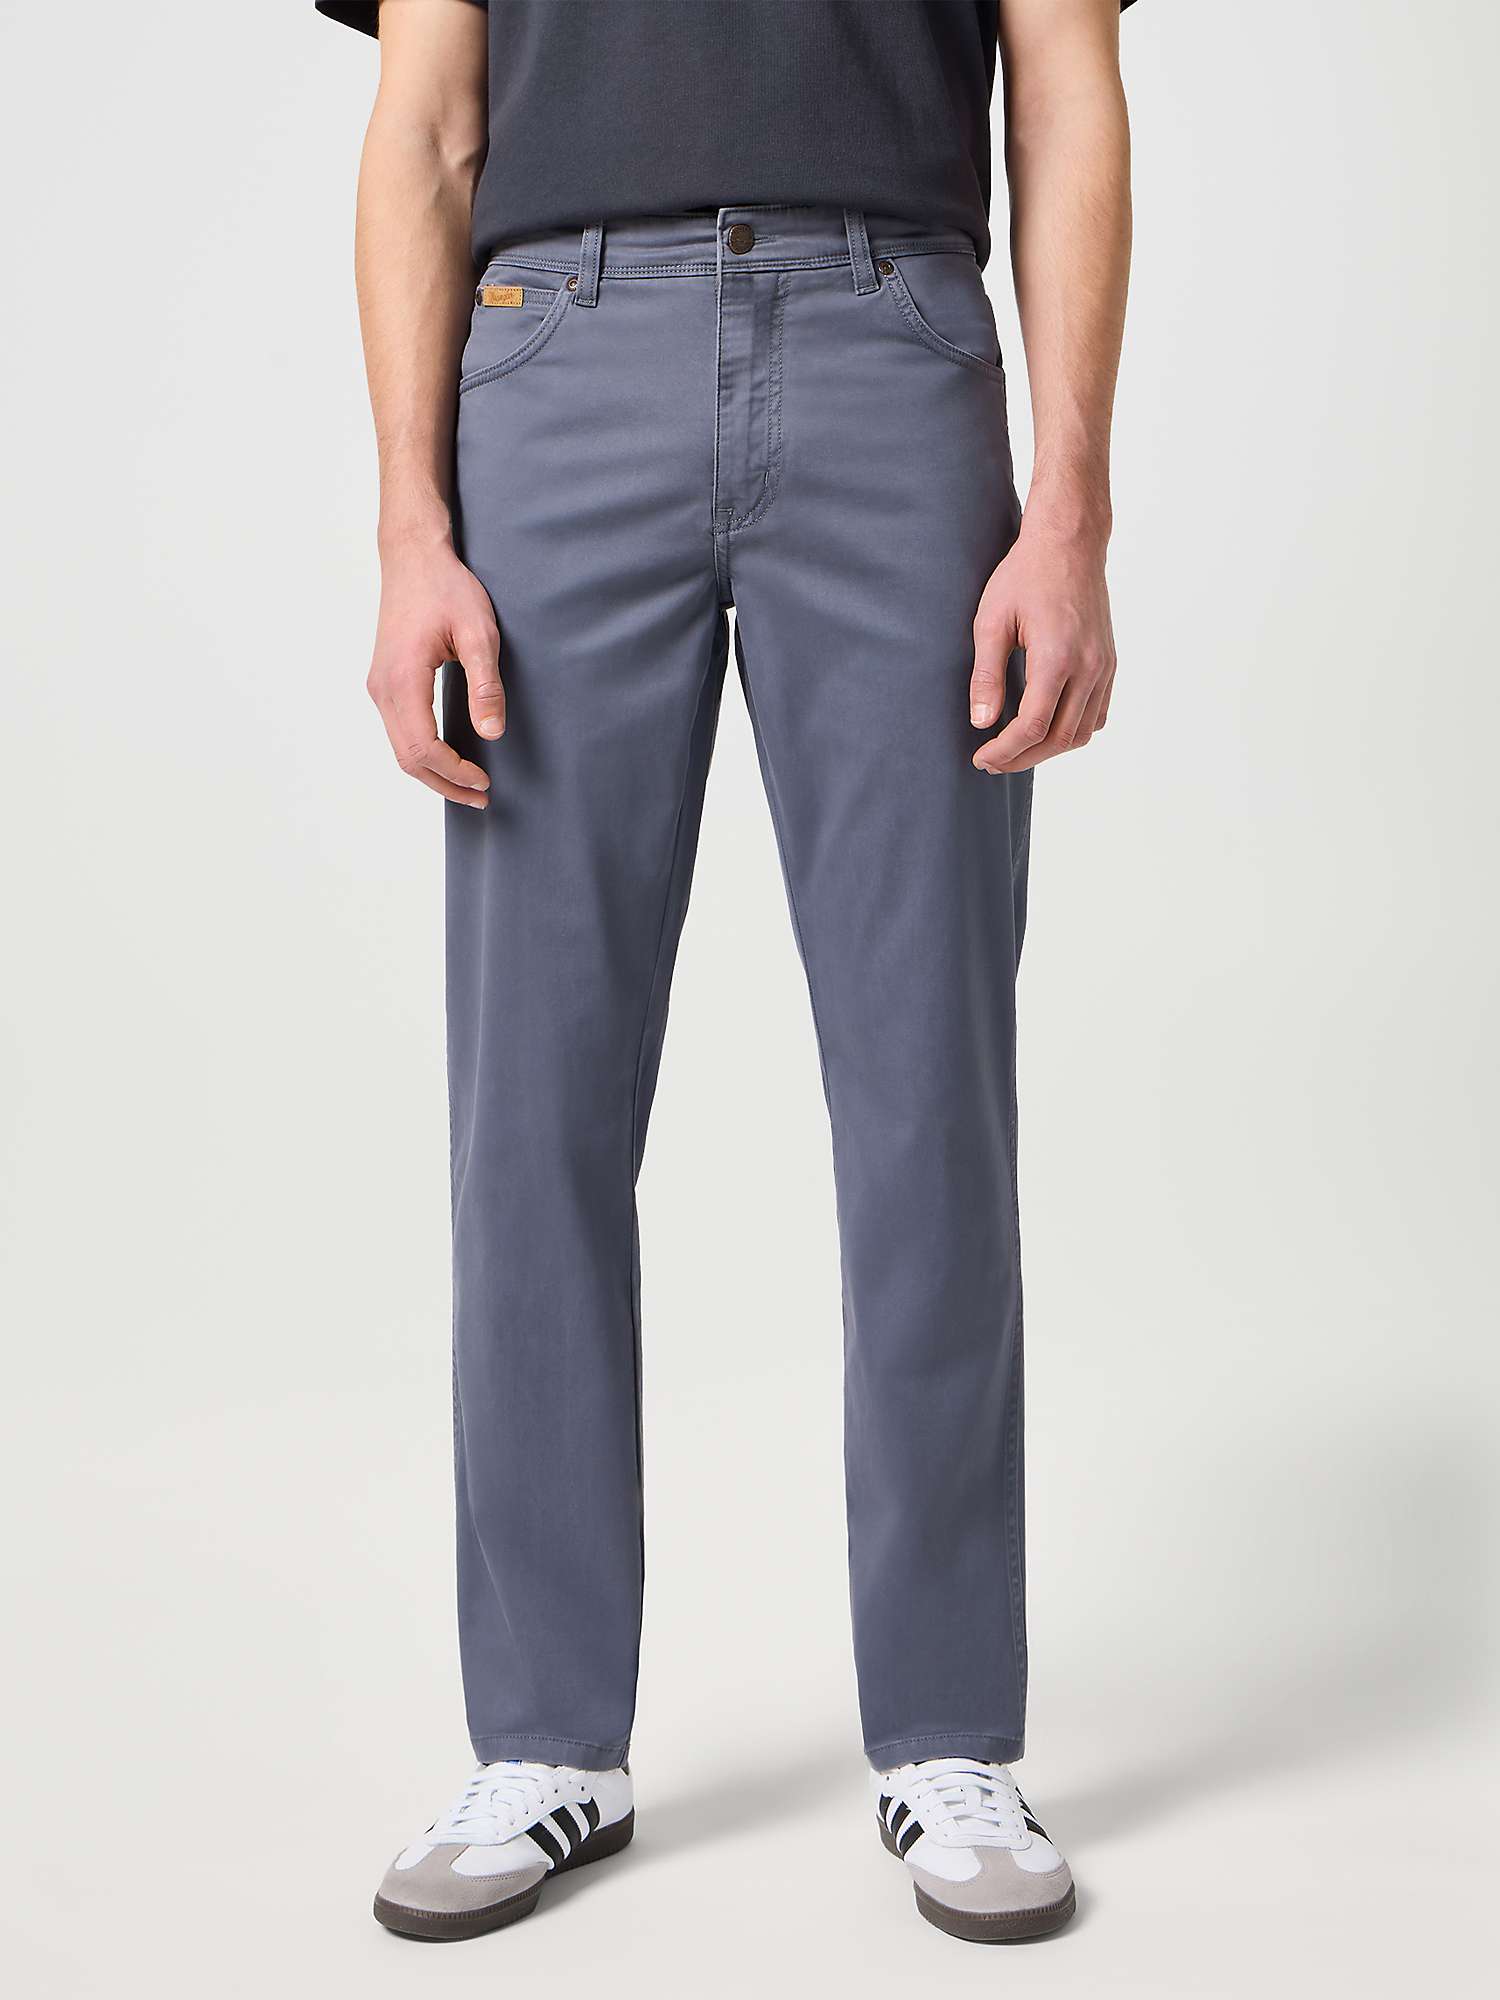 Buy Wrangler Texas Straight Fit Jeans, Turbulence Online at johnlewis.com